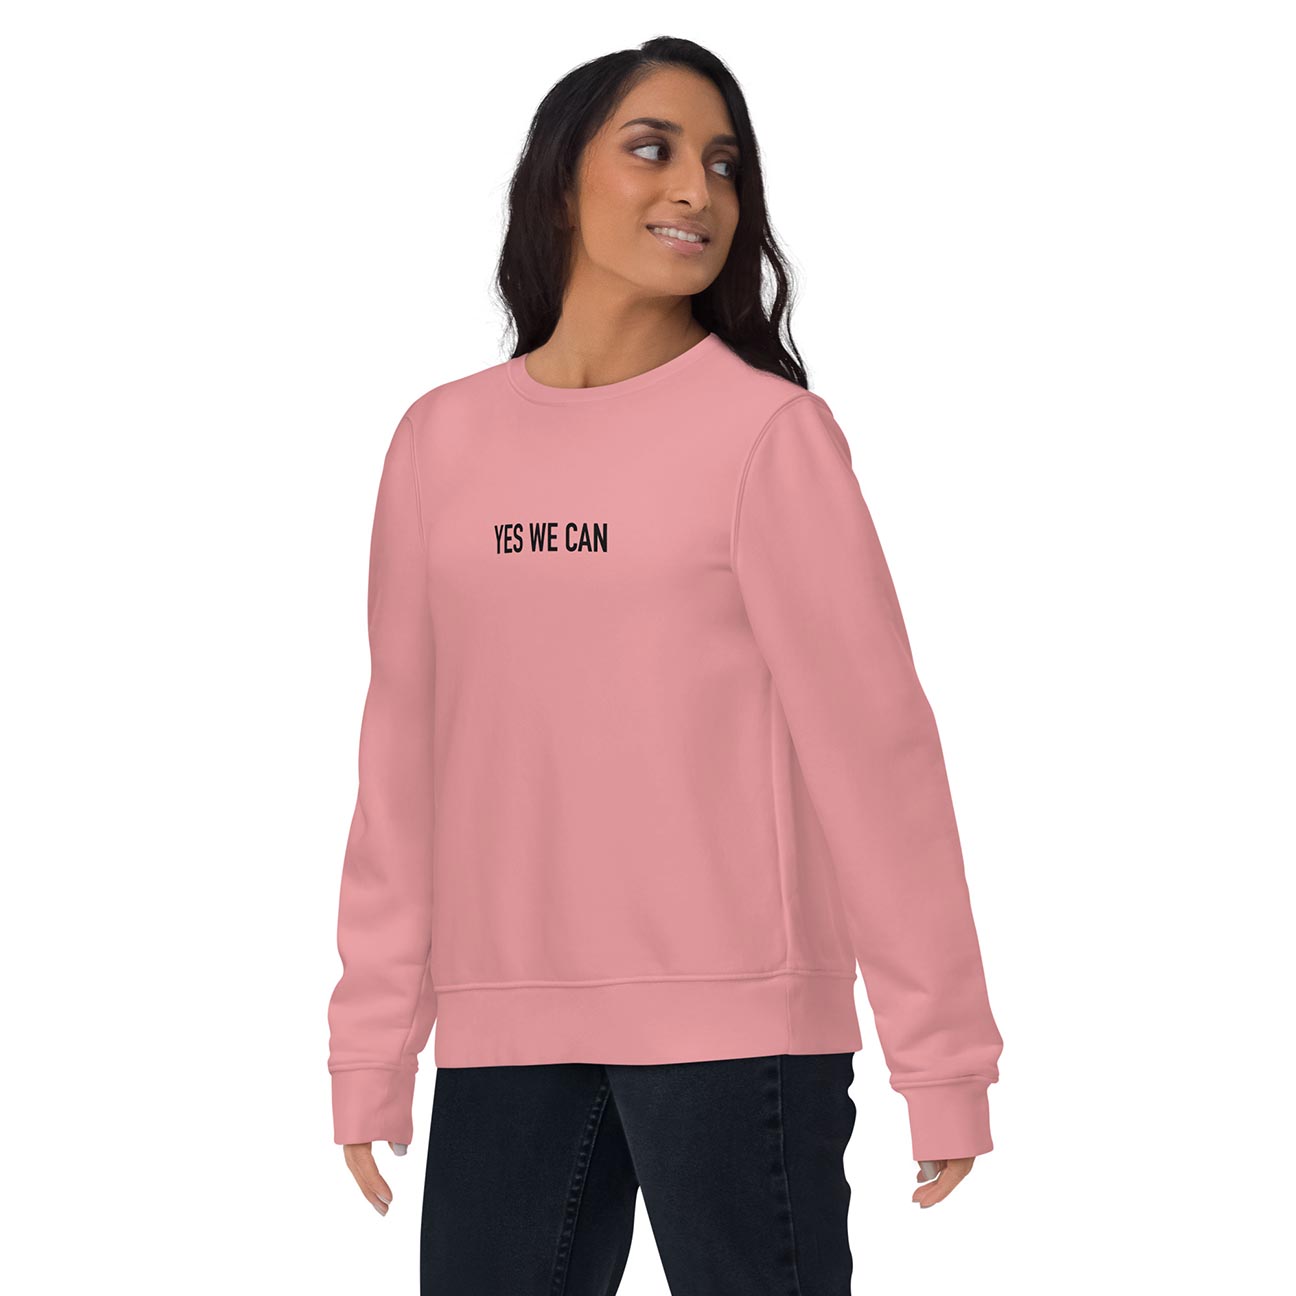 Women pink inspirational sweatshirt with Barack Obama's inspirational quote, "Yes We Can." 